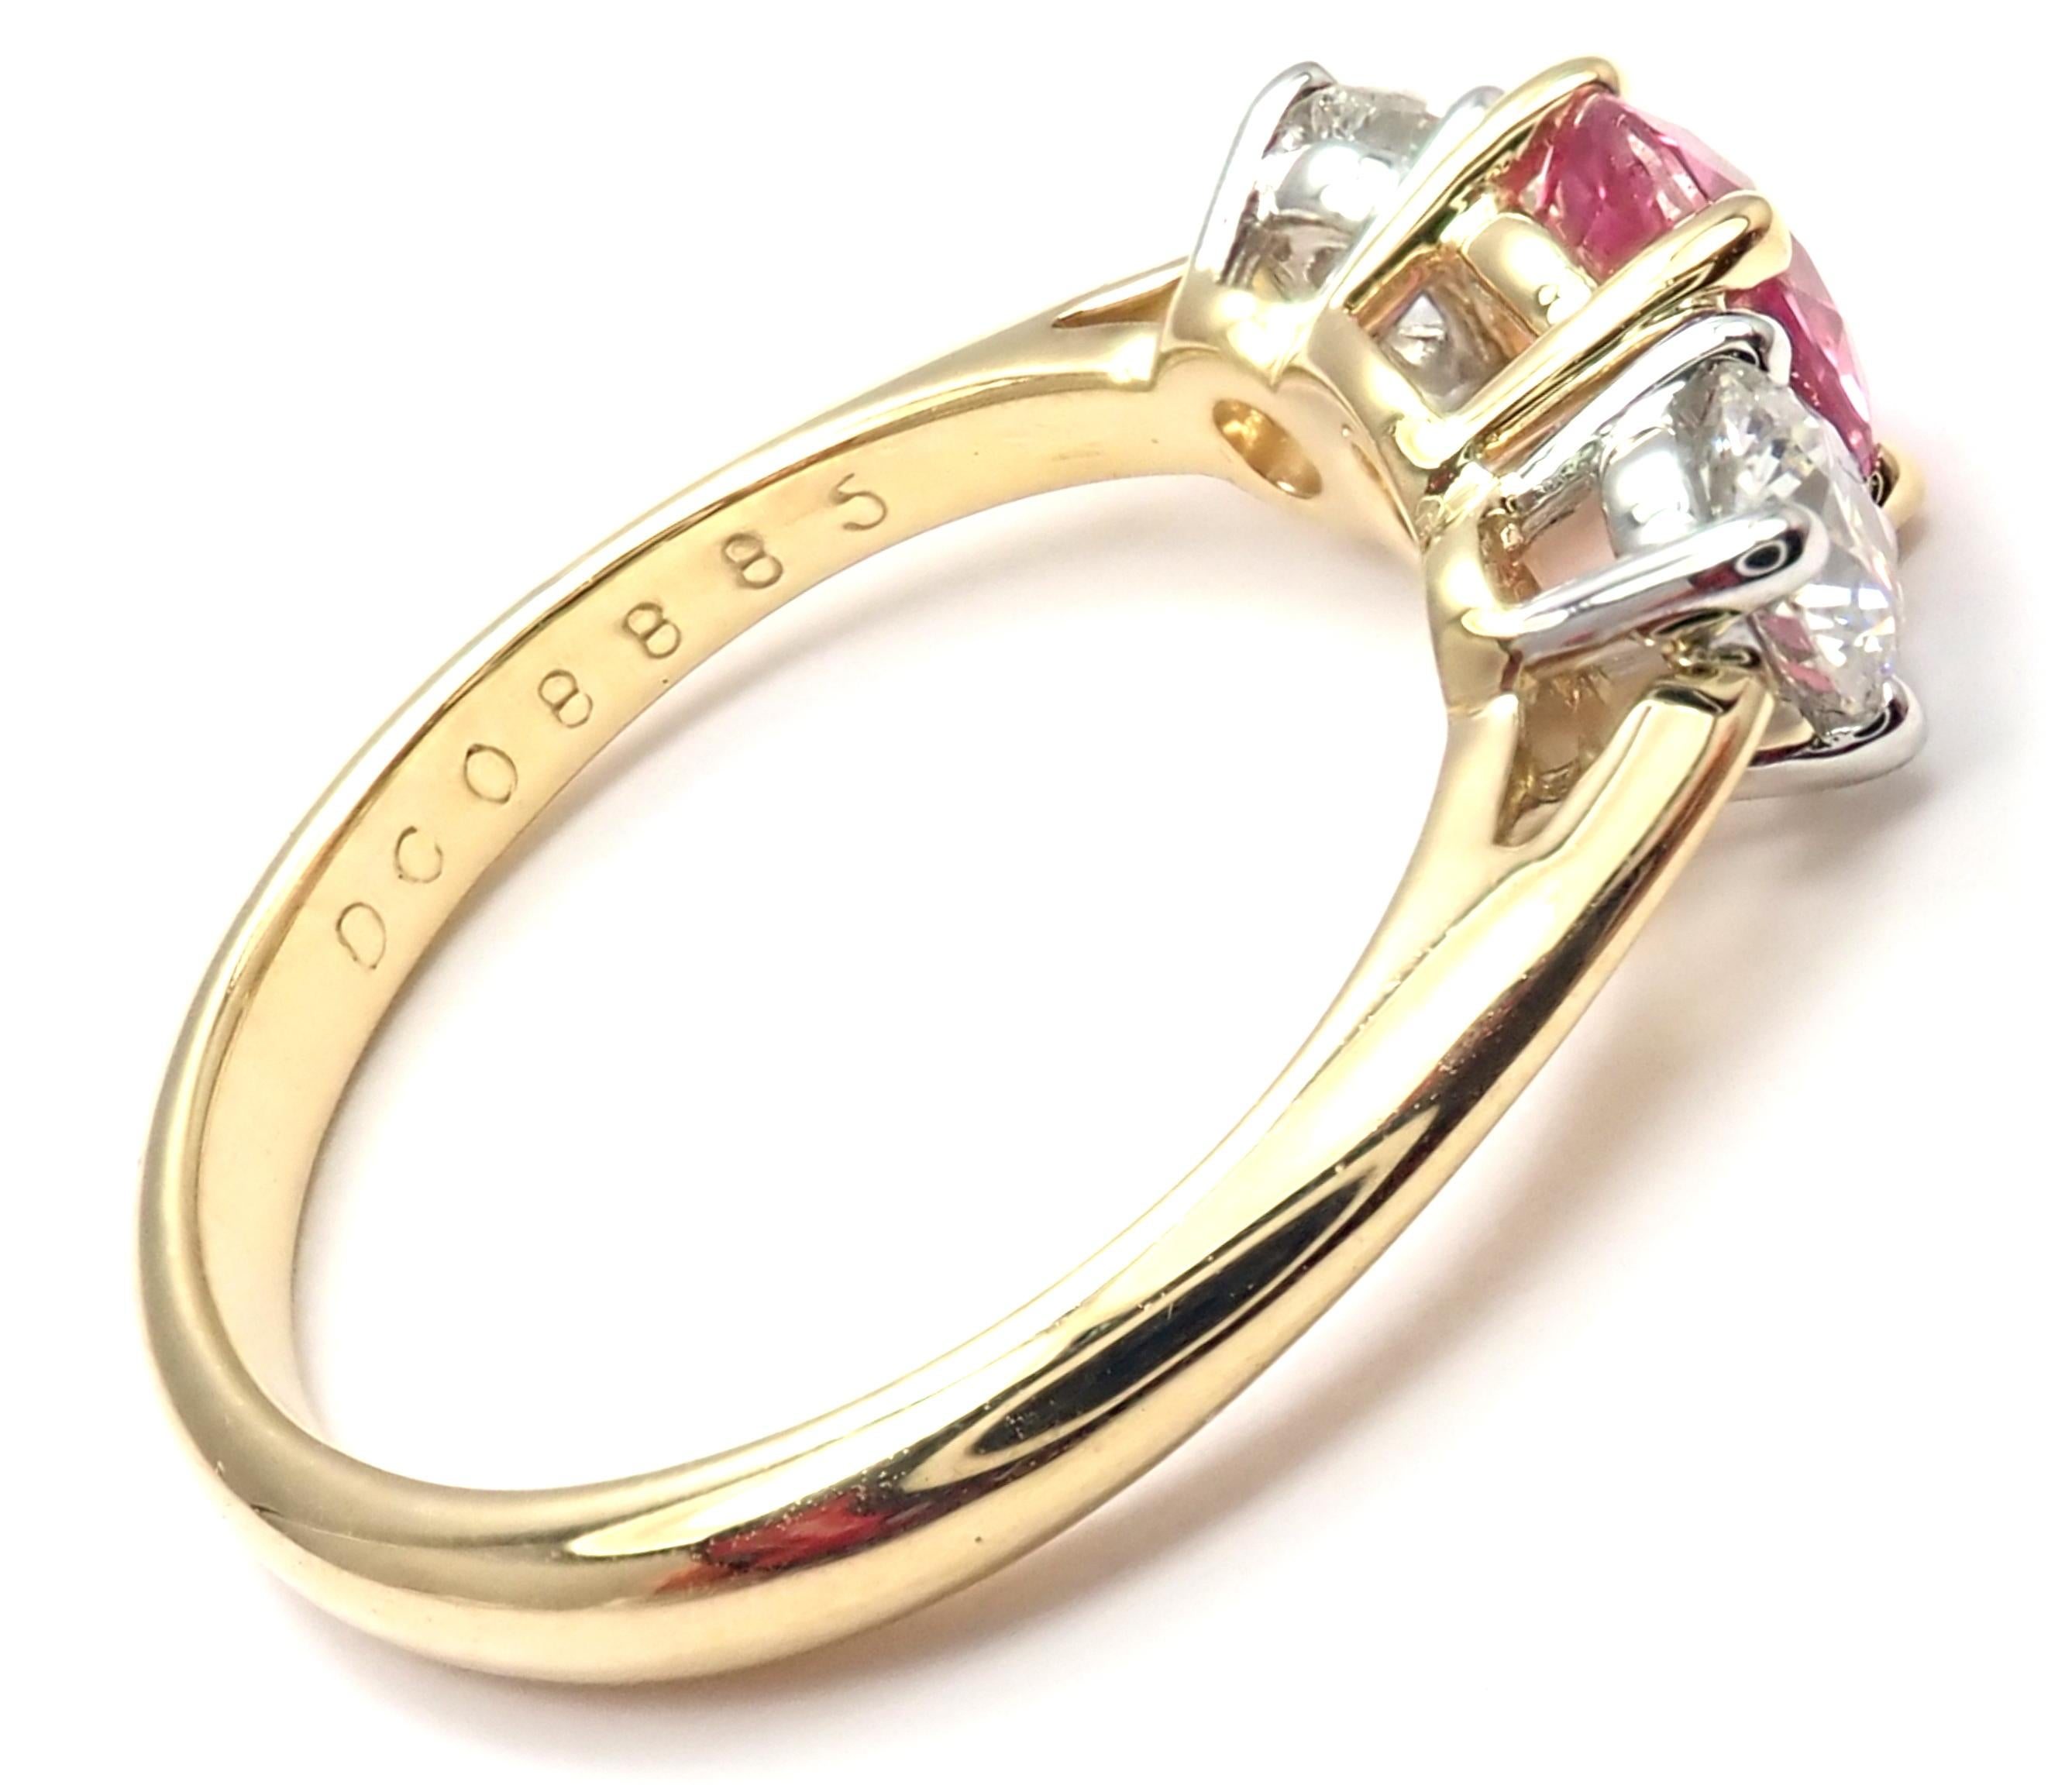 18k Yellow Gold And Platinum Diamond Pink Sapphire Three Stone Band Ring.
With 2 Round Brilliant Cut Diamonds VS1 clarity, G color, Total weight Approx .50ctw
1 Round Pink Sapphire total weight approx.  0.60ct
Measurements:
Ring Size: 4 3/4
Weight: